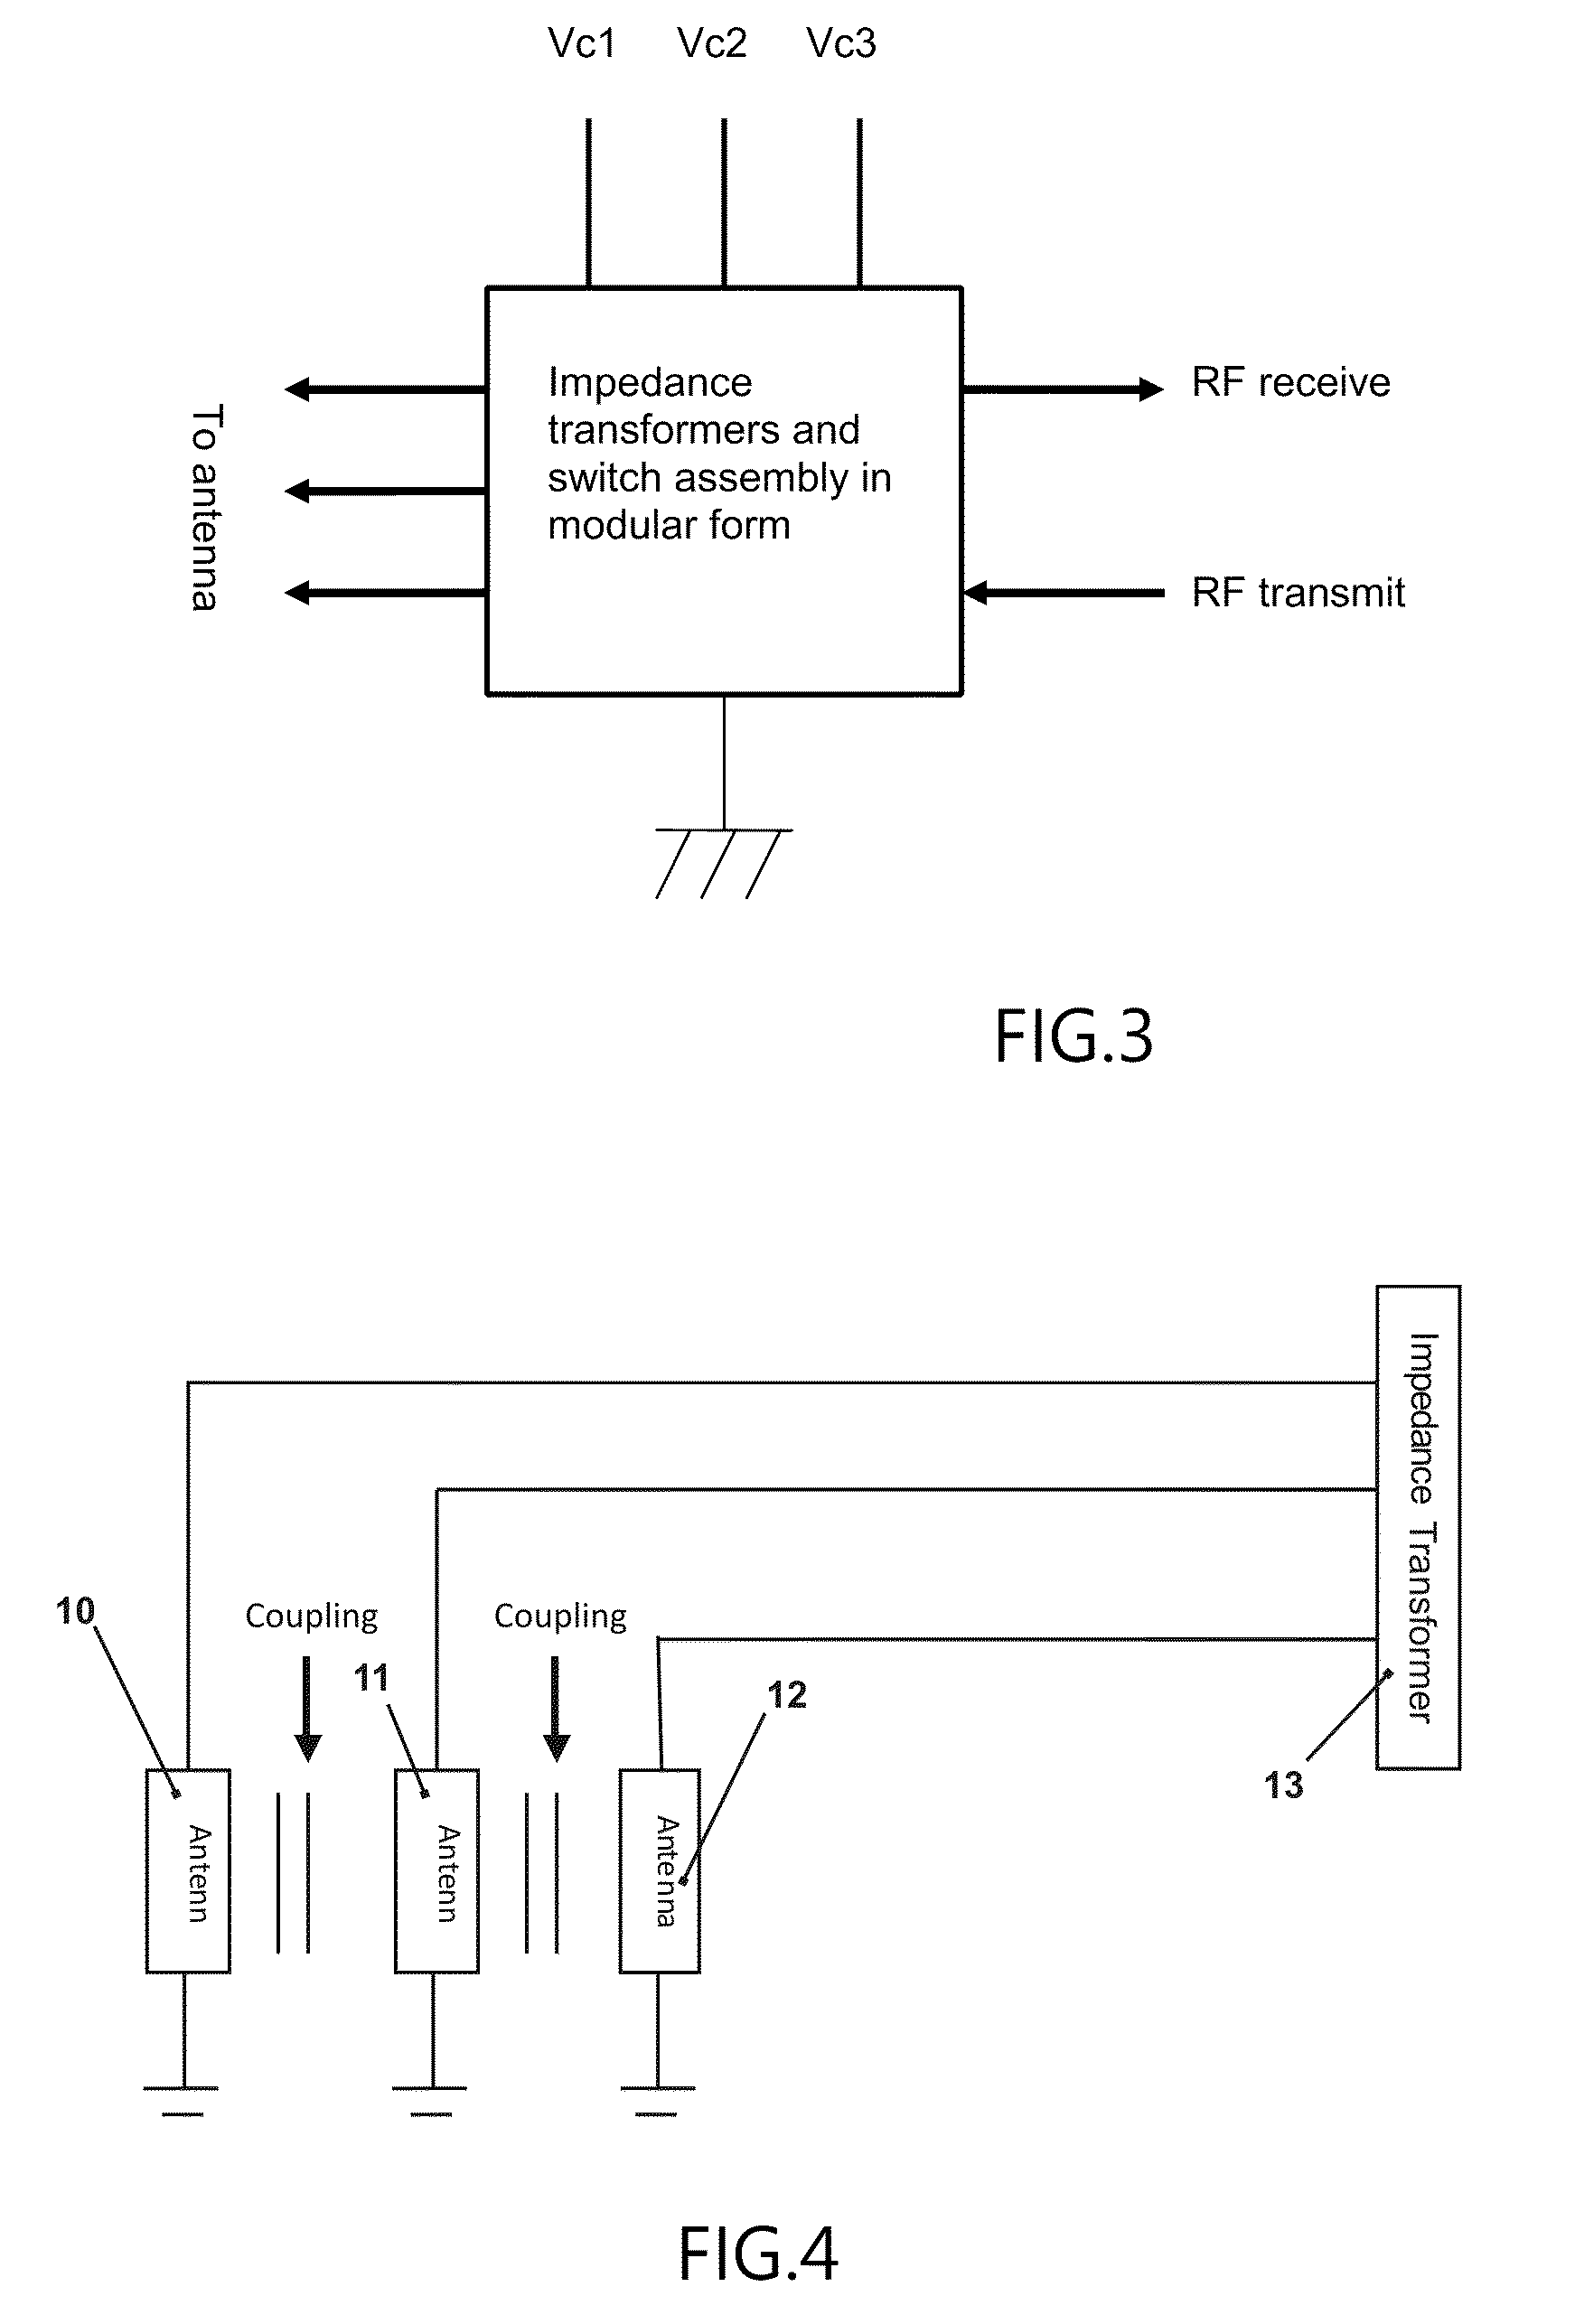 Multi-frequency, noise optimized active antenna